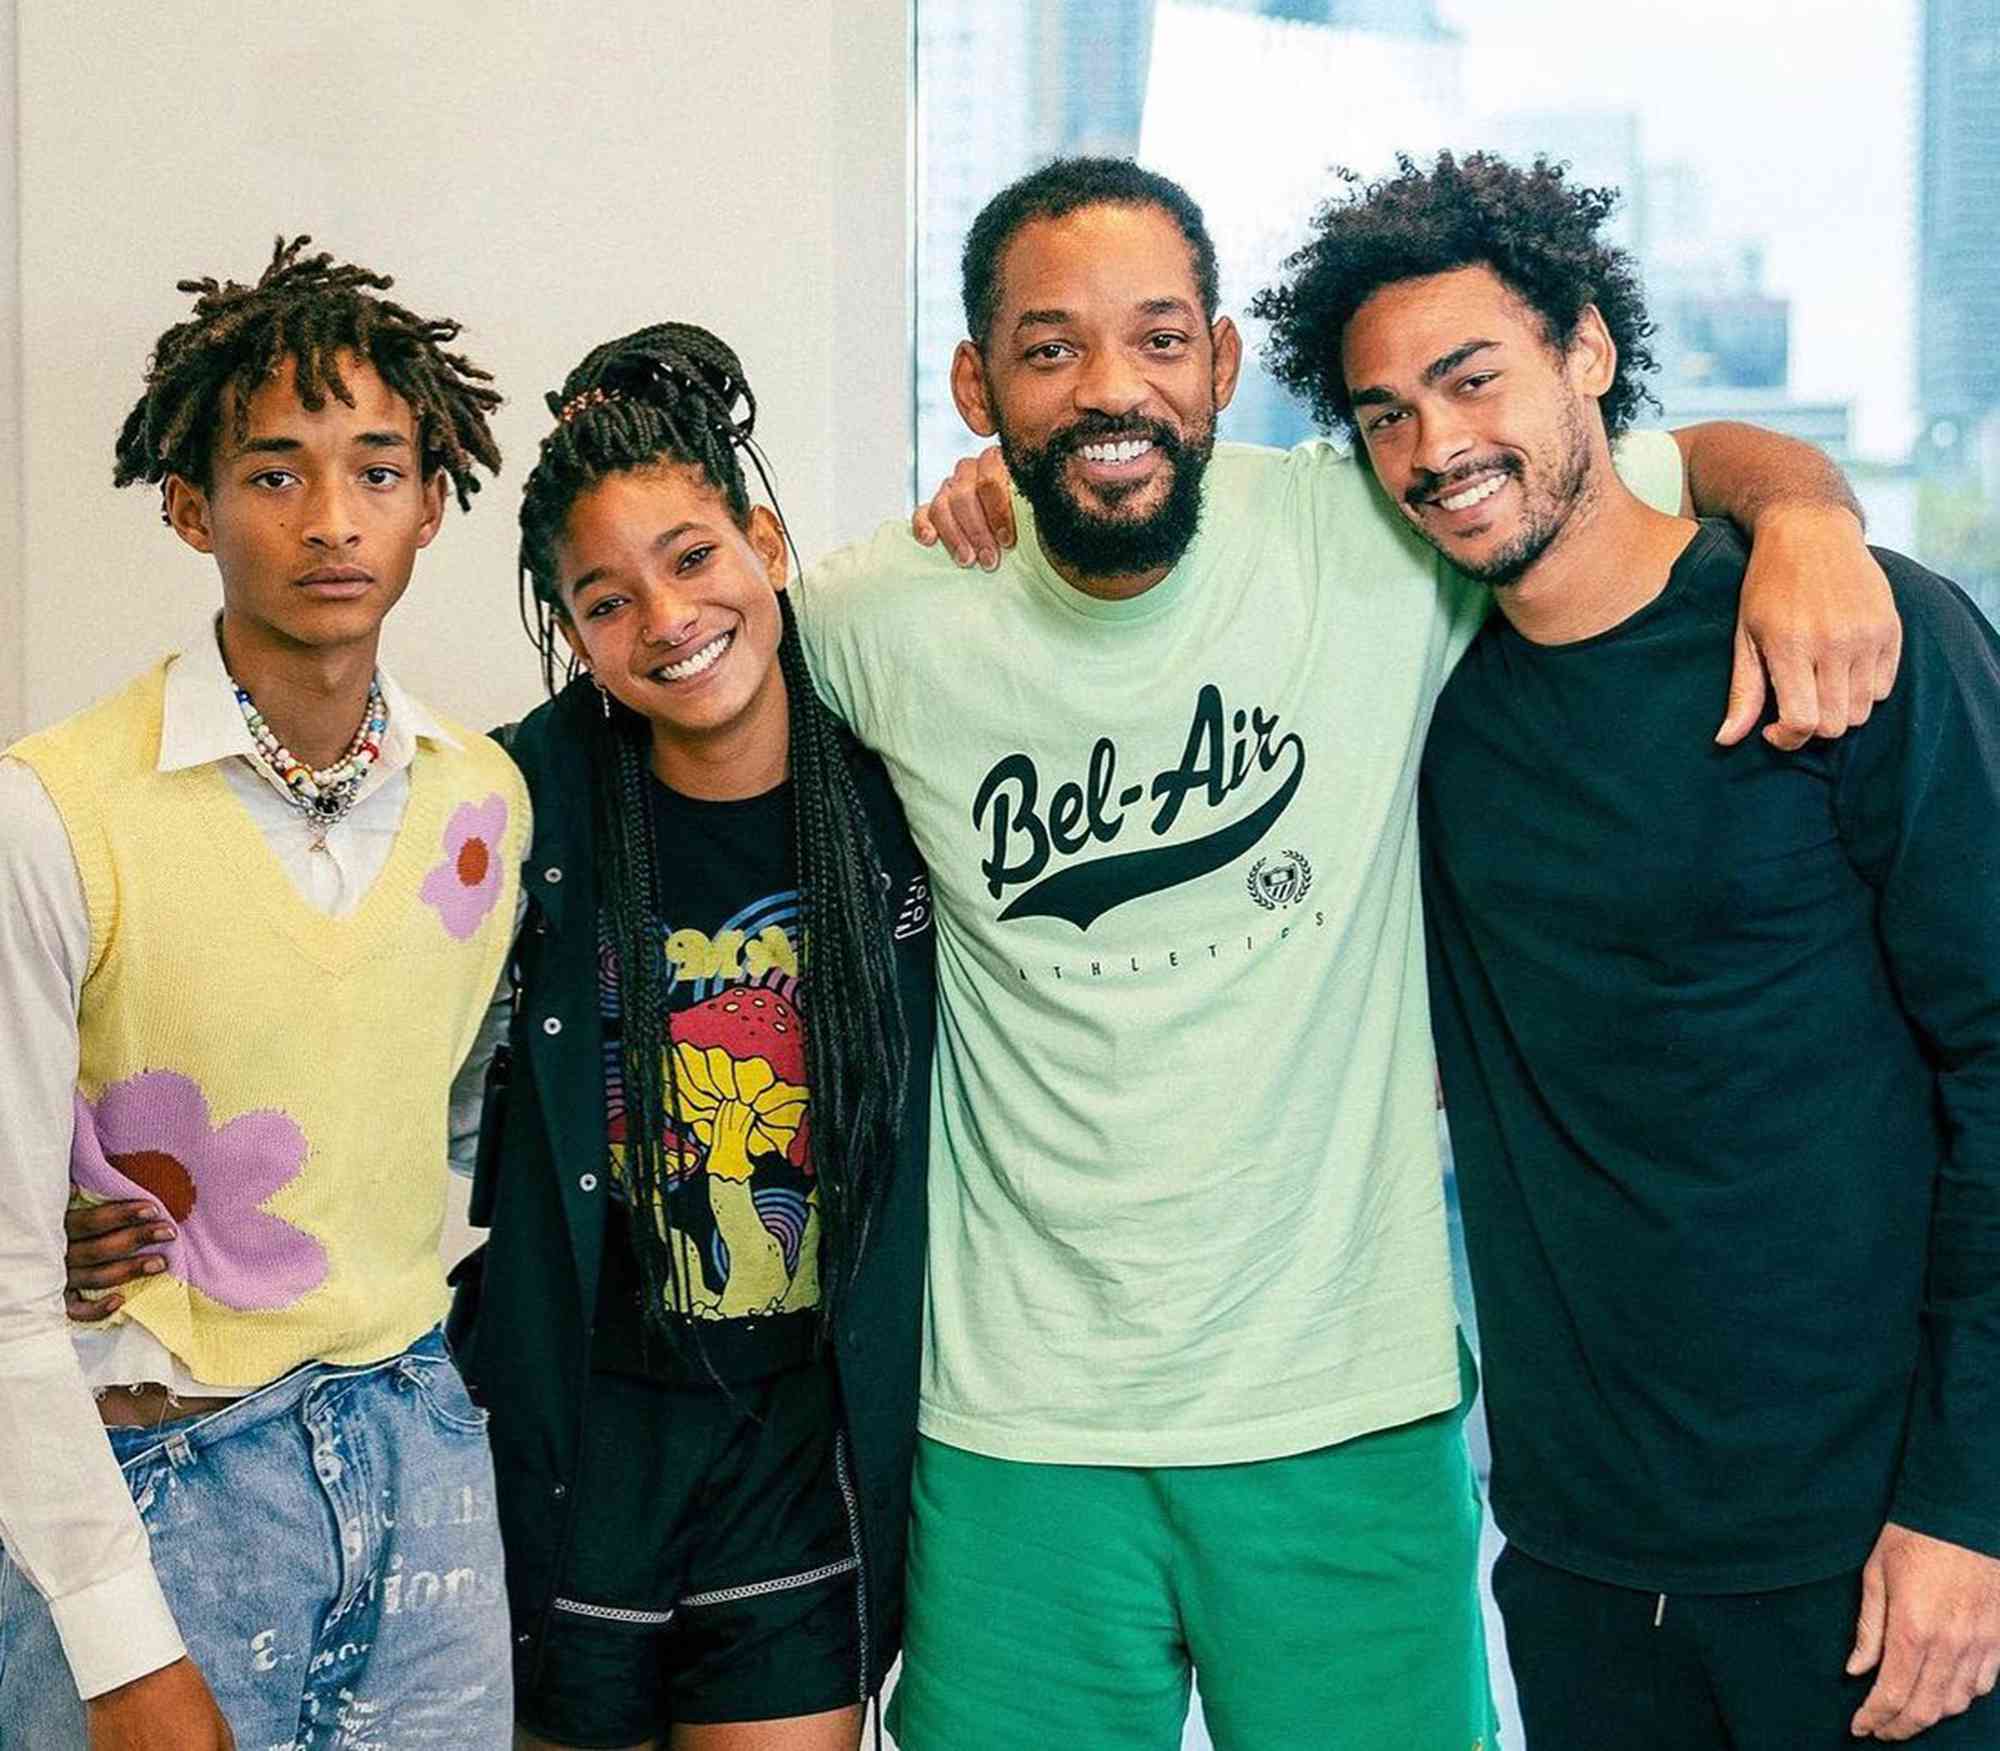 Will, Trey, Jaden and Willow Smith